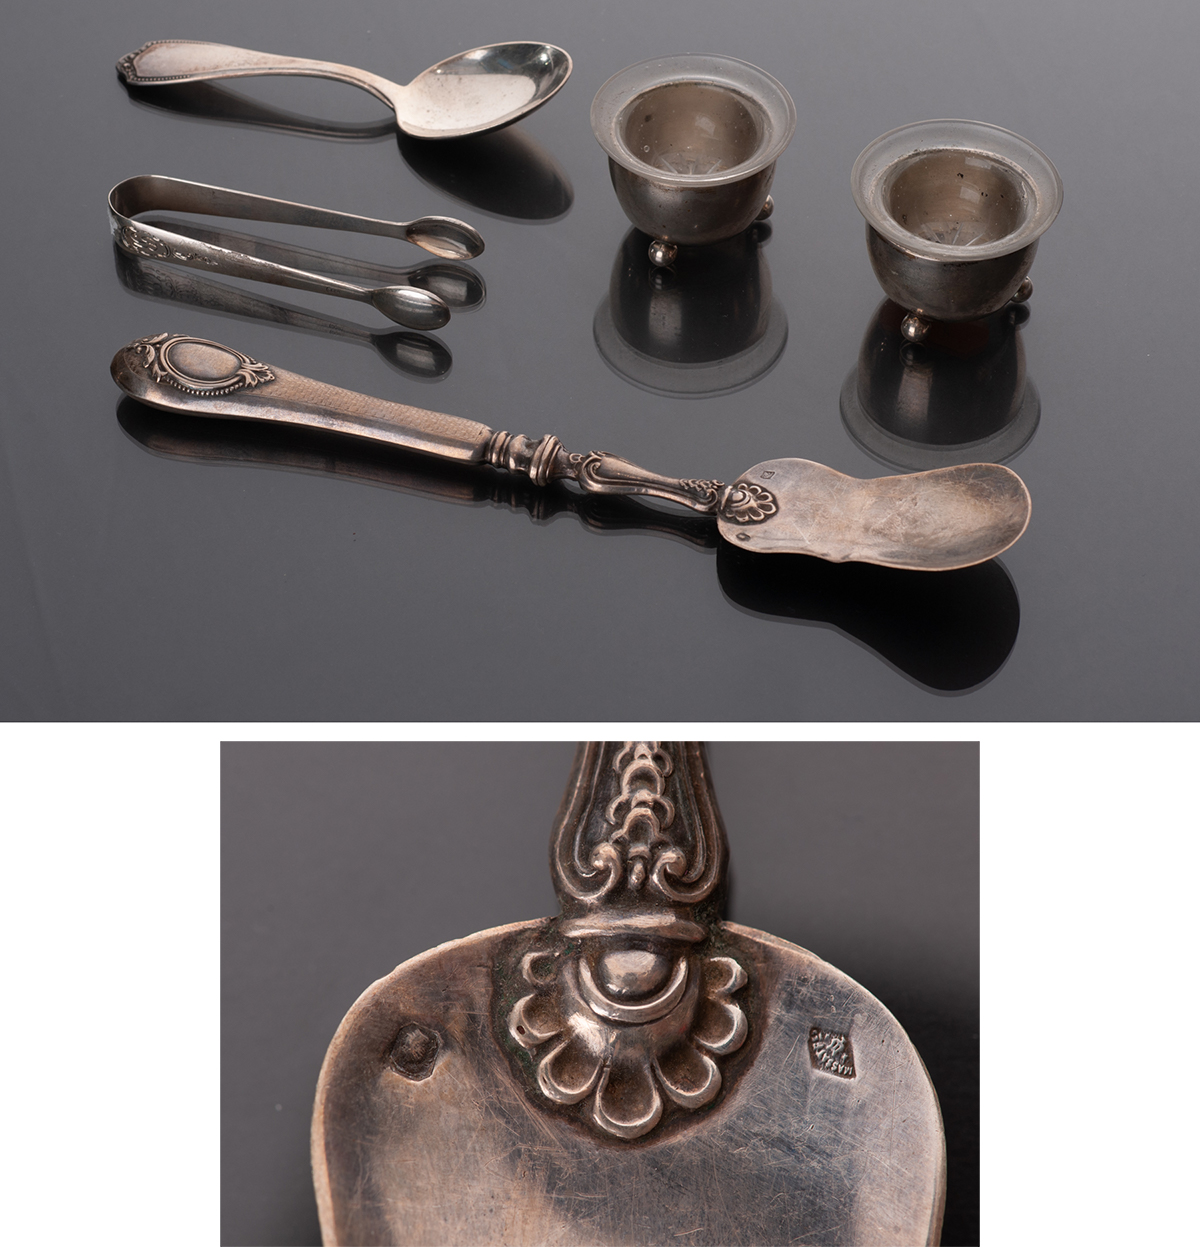 Silver set consisting of four objects